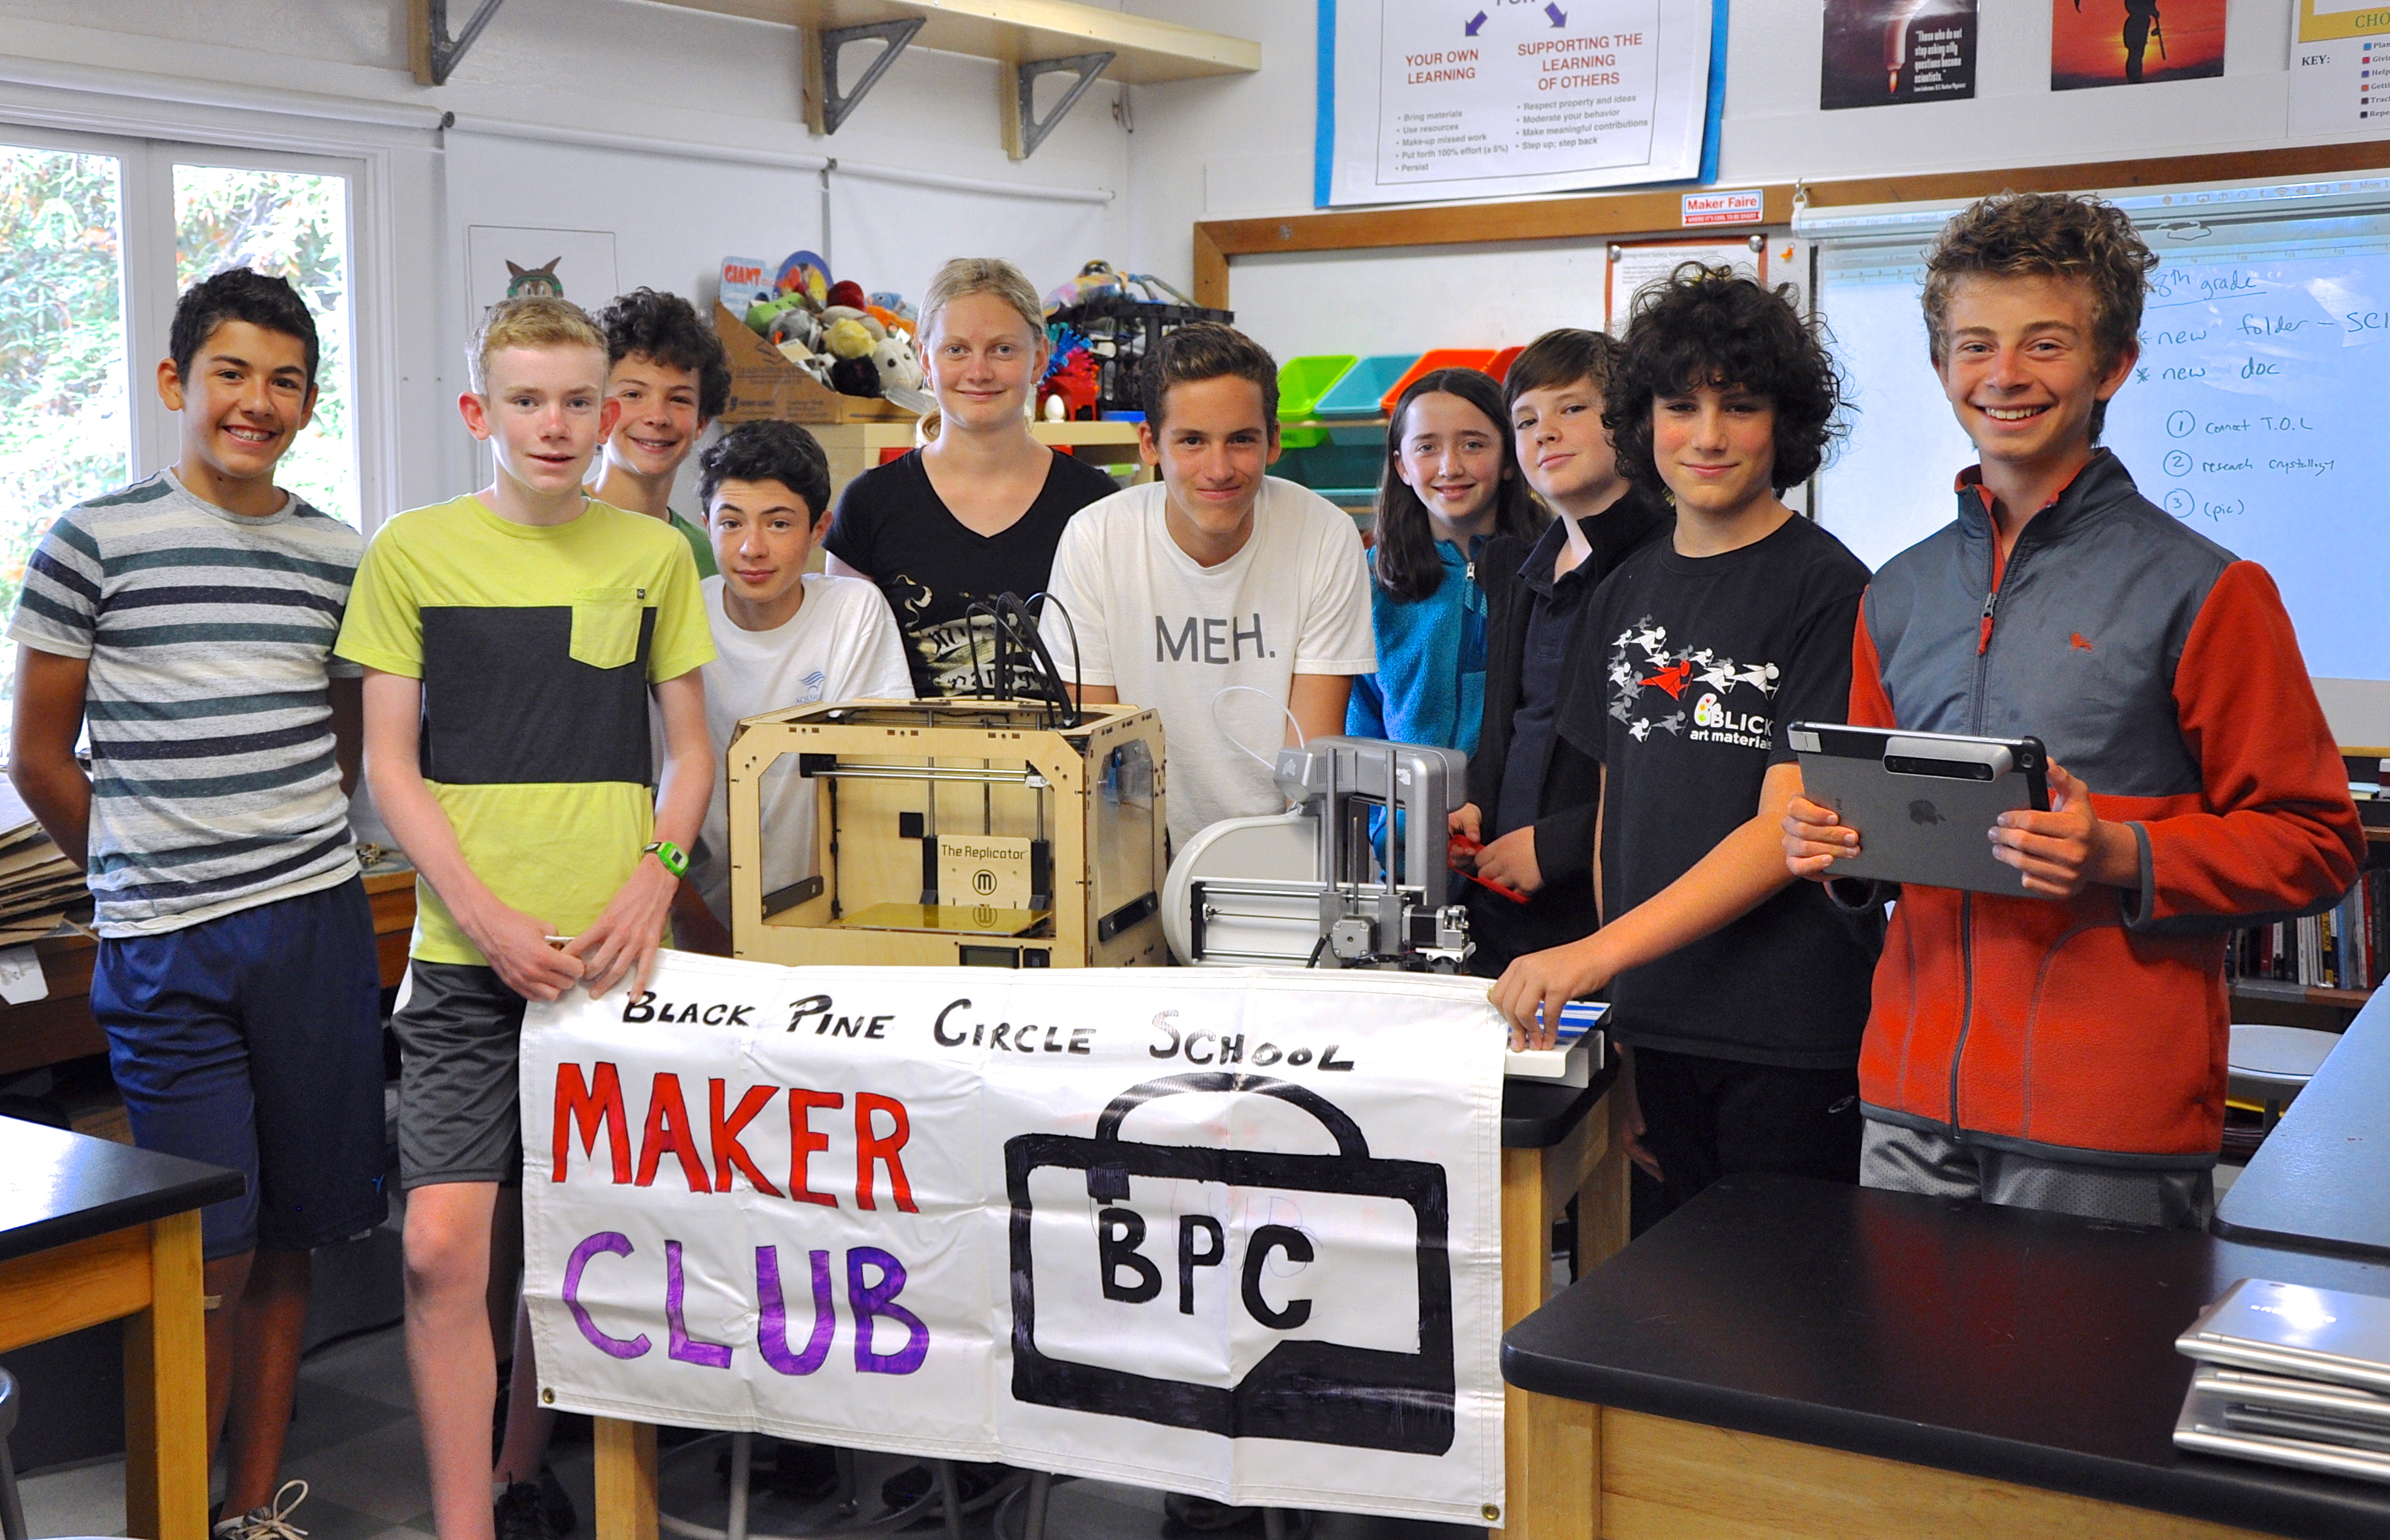 3D Printing in the Classroom: Q & A with Students and Teacher